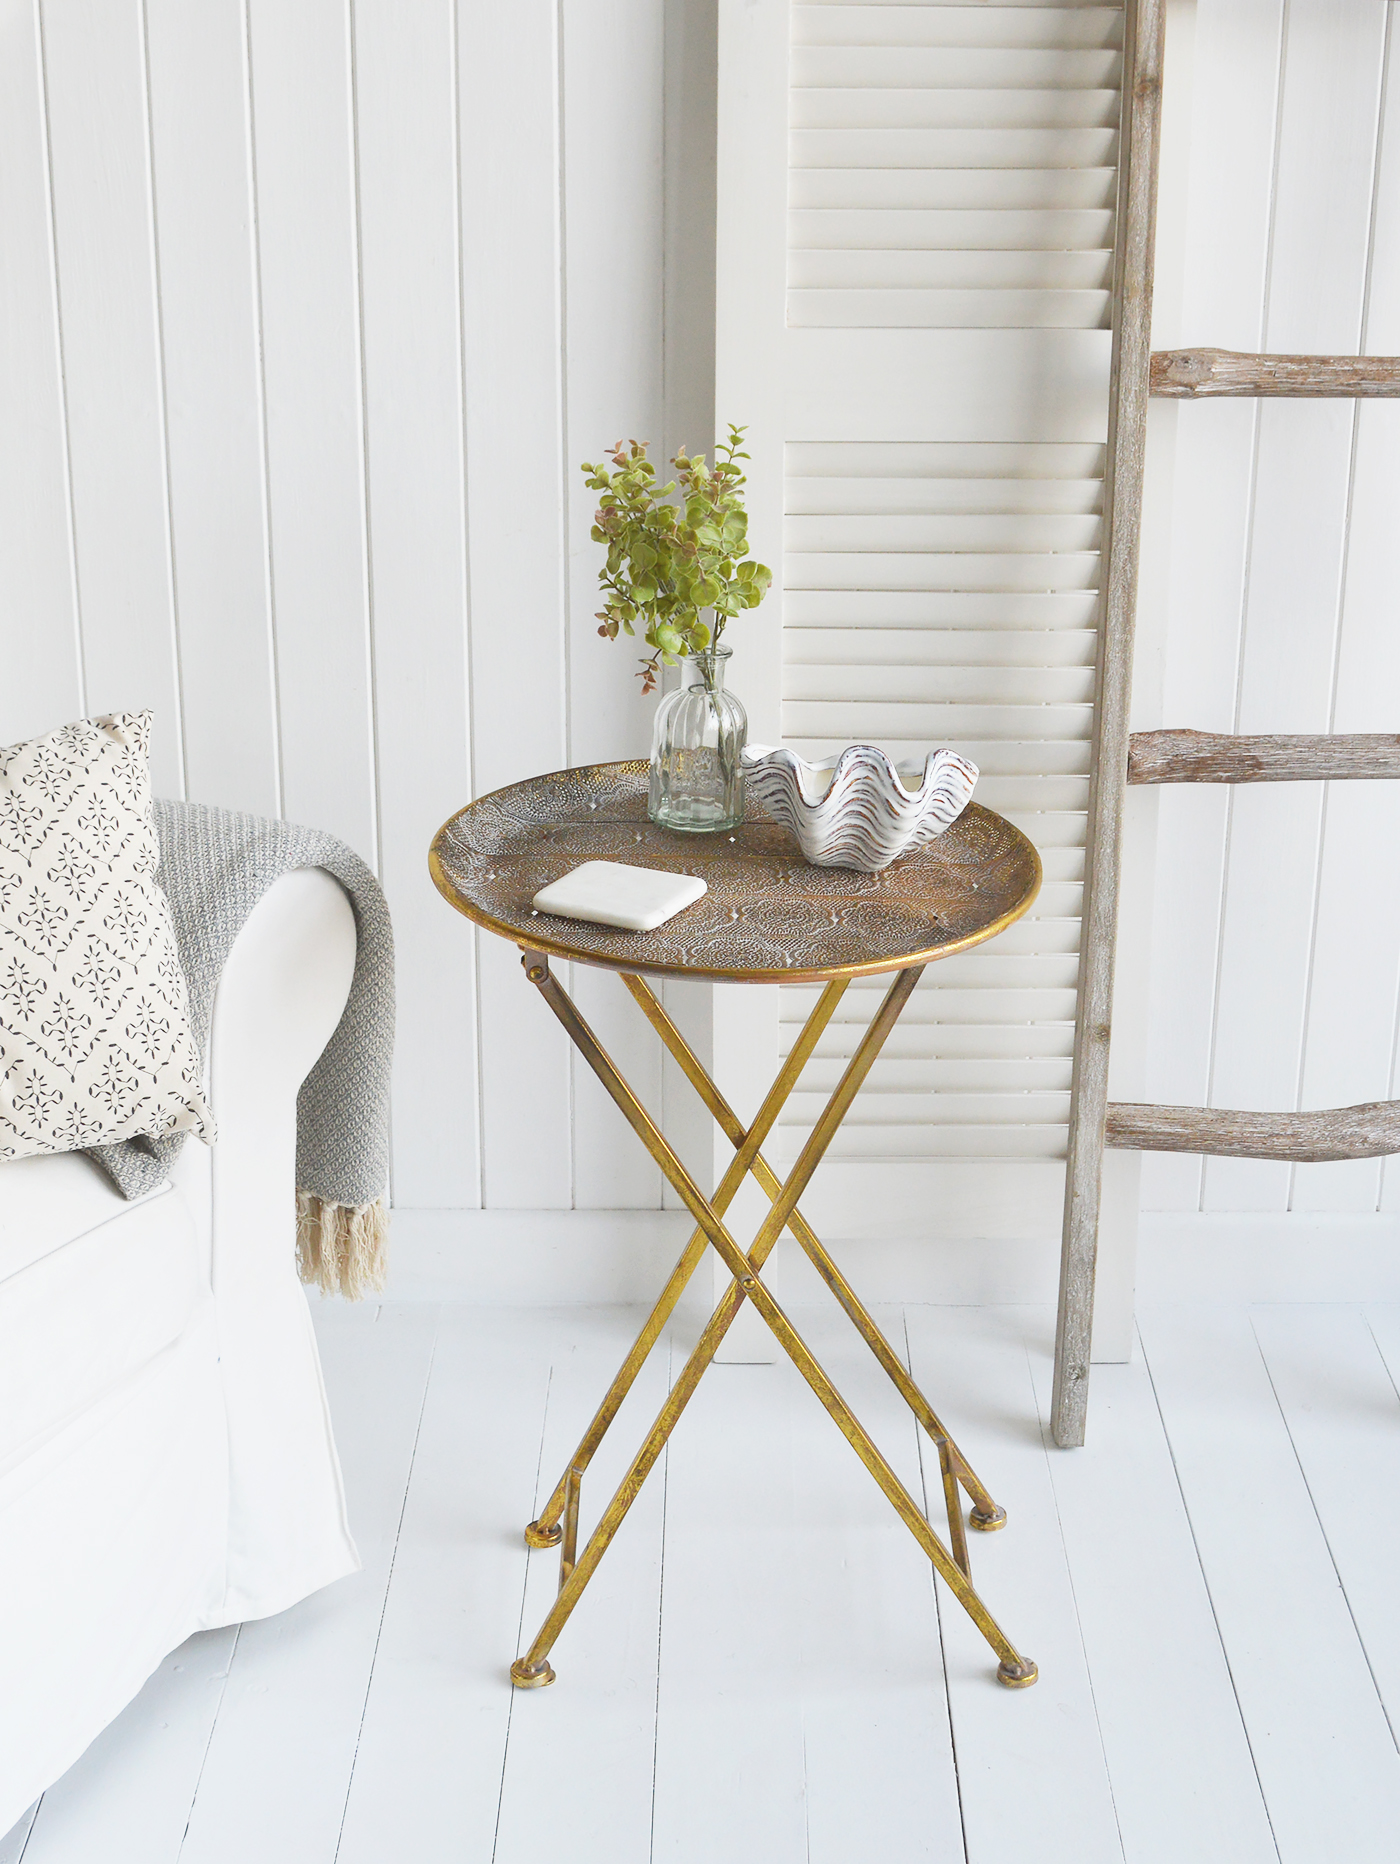 The Charleston table, a contrasting antiqued gold side table againes the neutral Hamptons living room